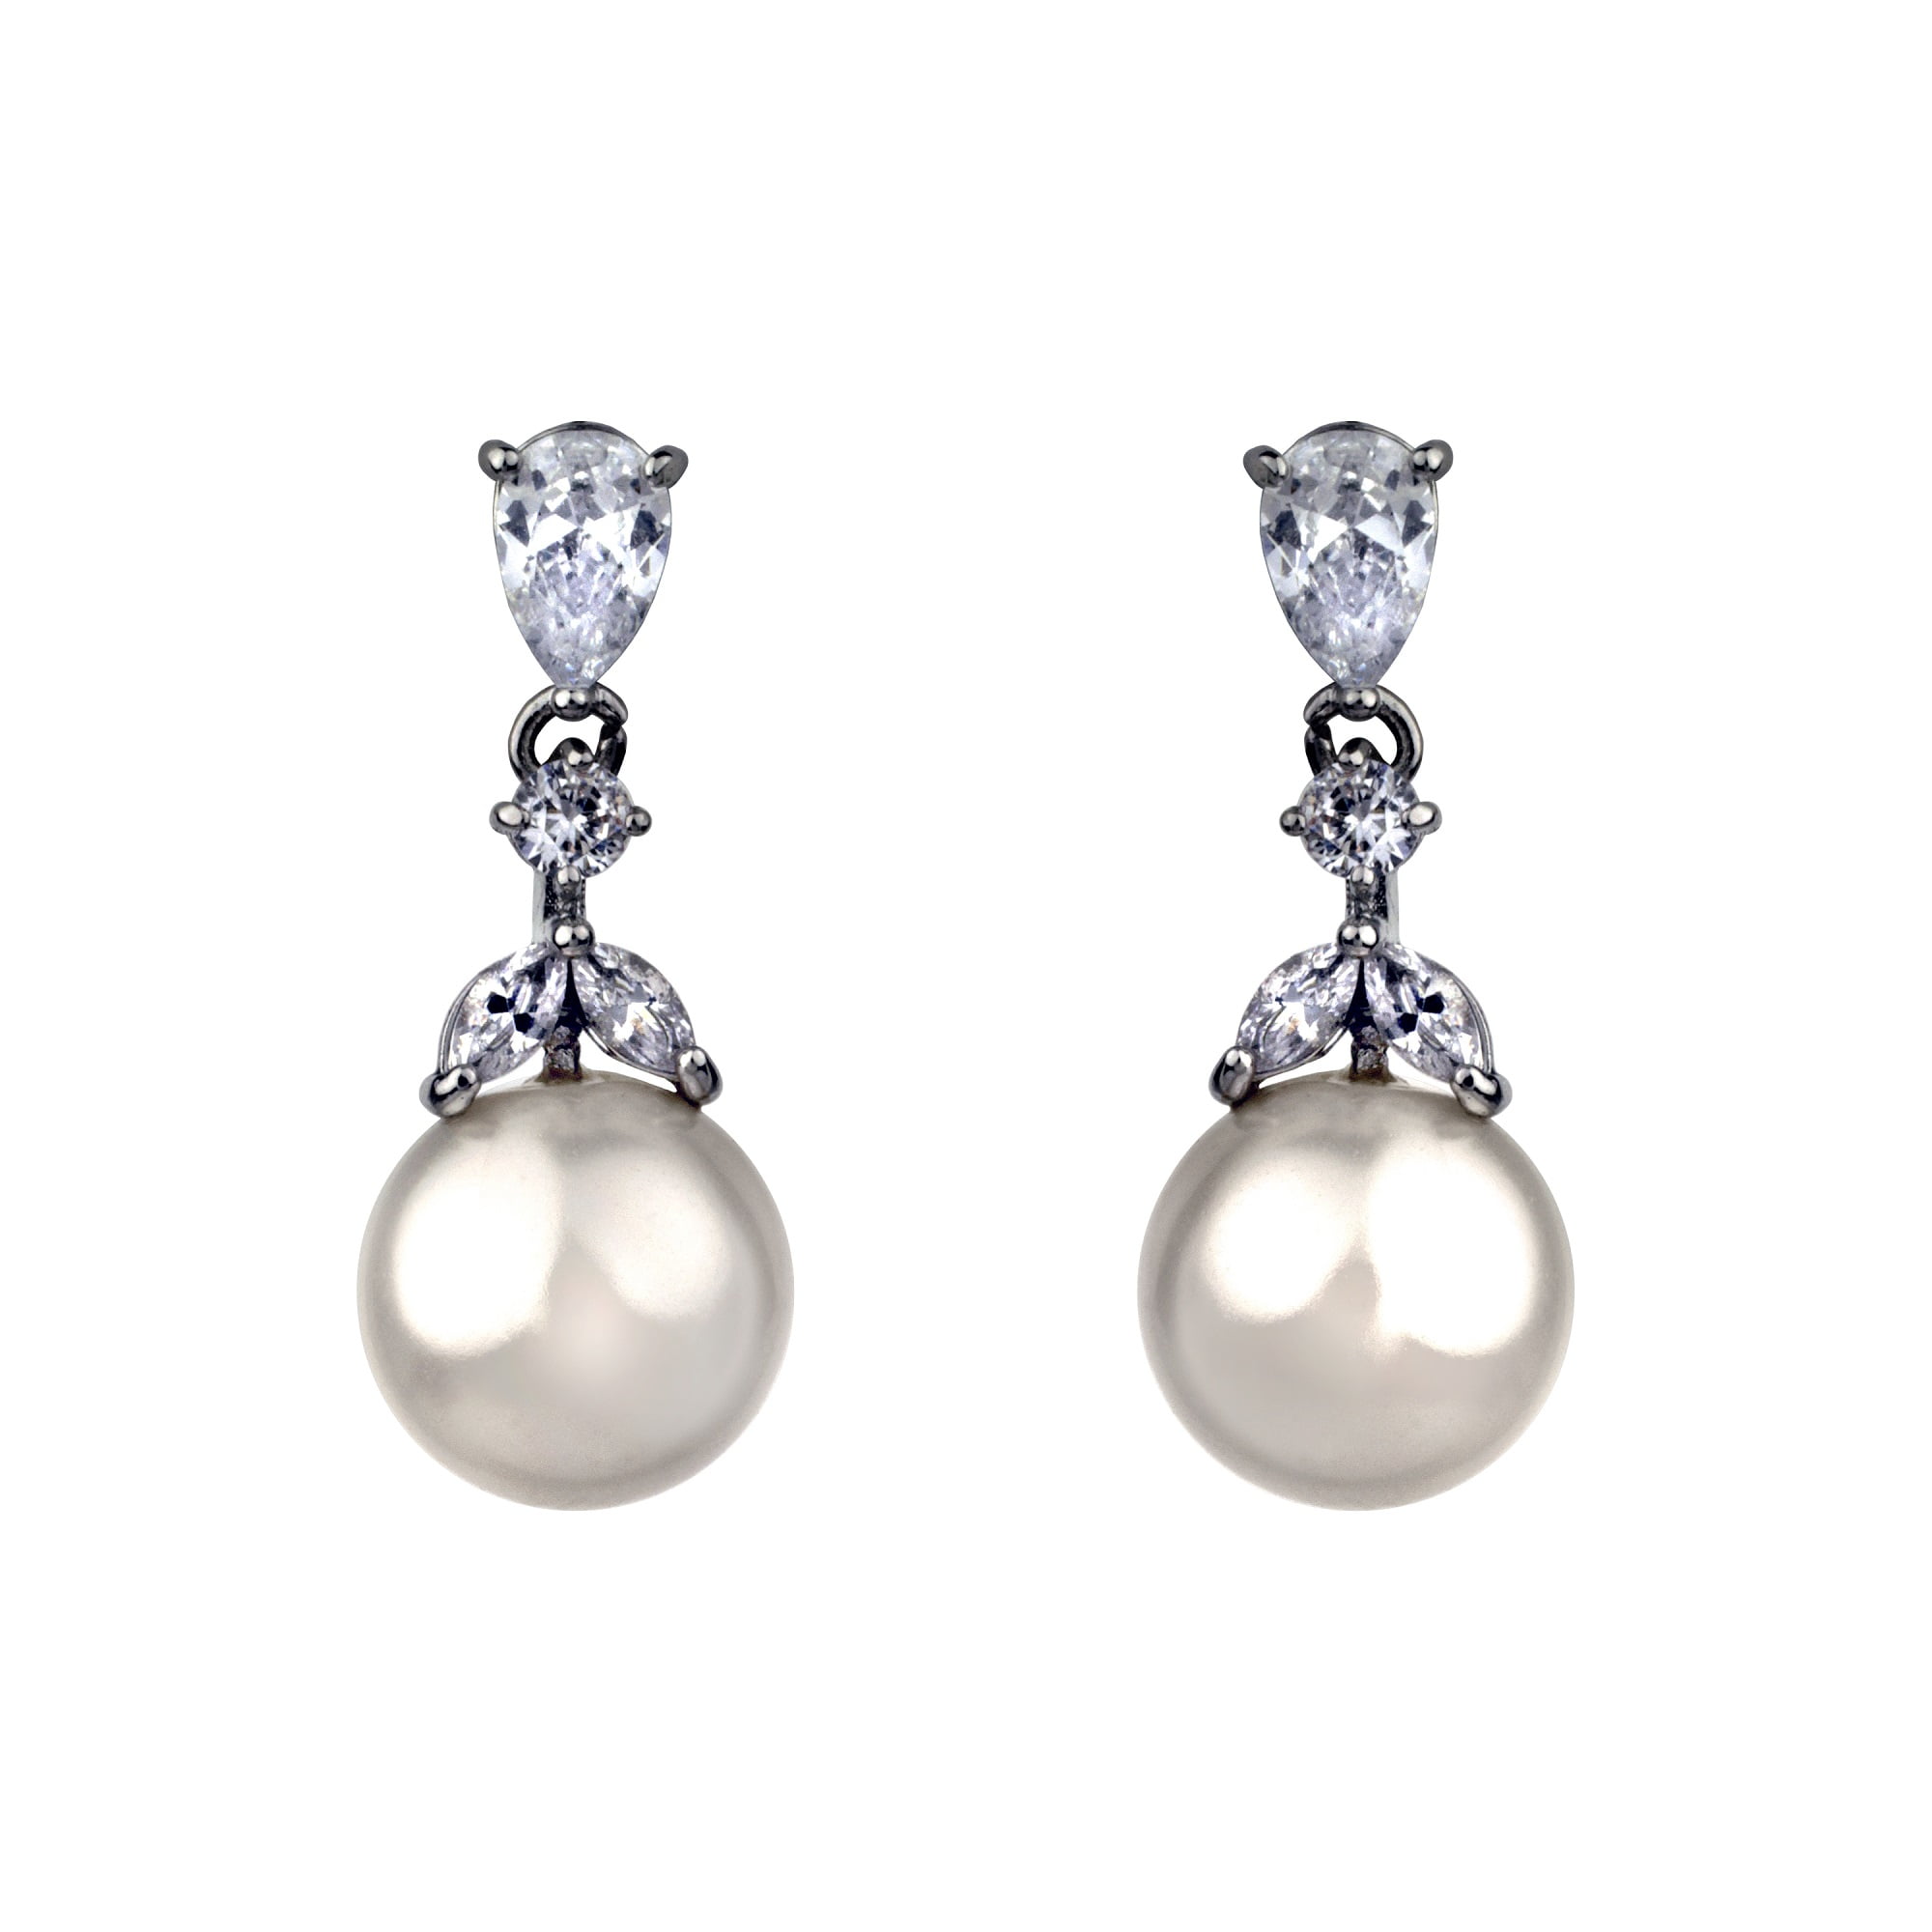 Sterling Silver Simulated White Pearl 10mm Stud Earrings & Necklace Set with CZ Accents